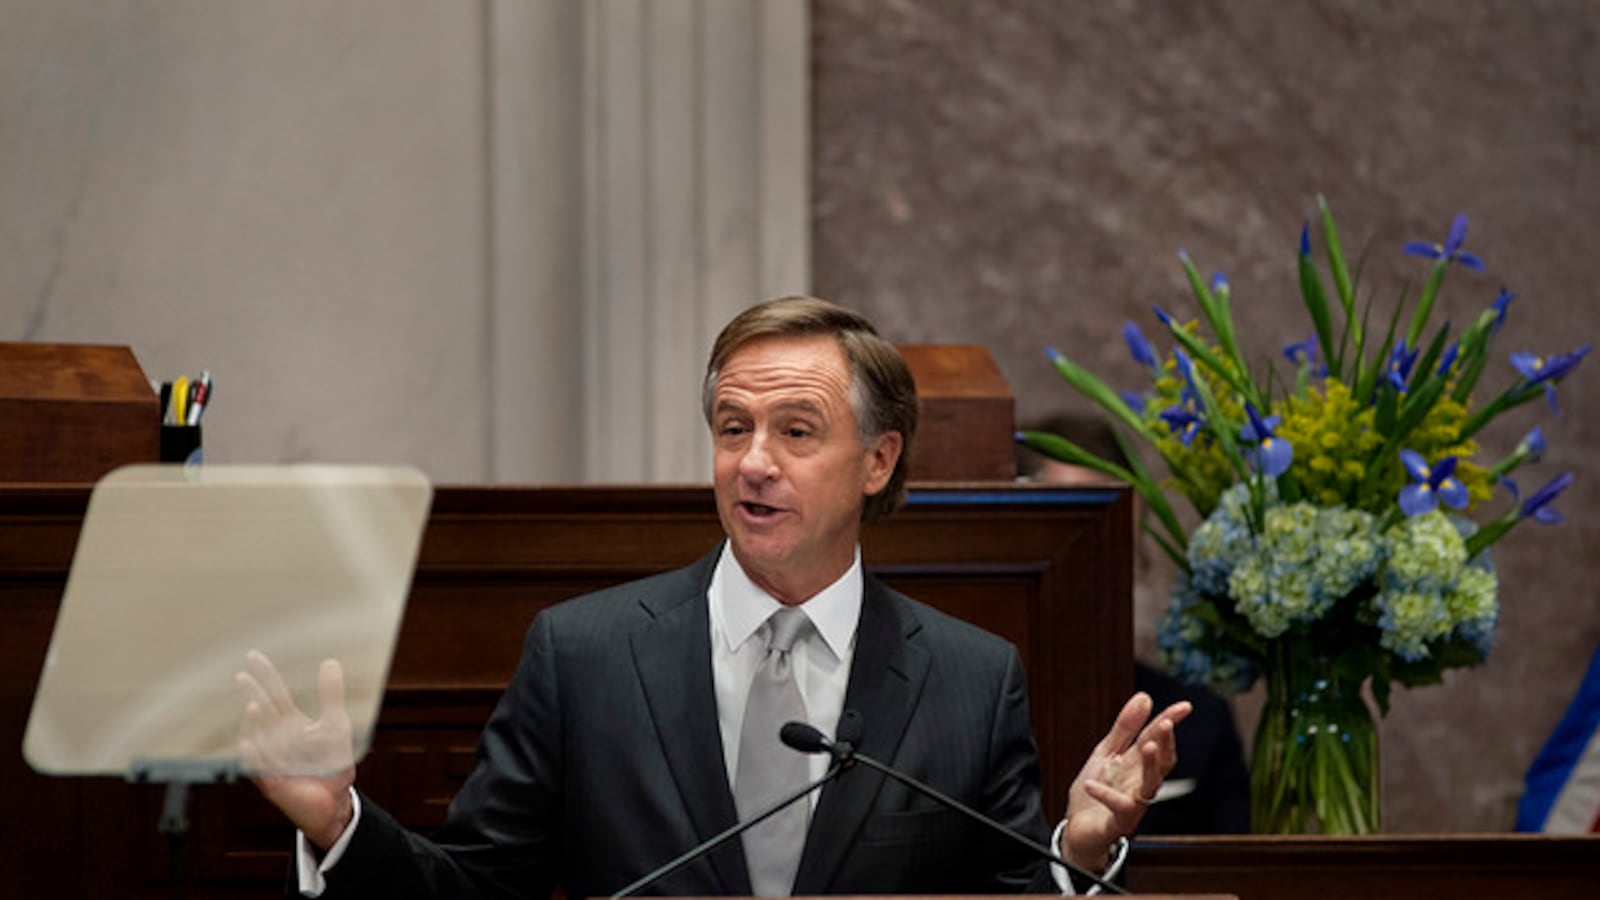 Bill Haslam has been Tennessee's governor since 2011.